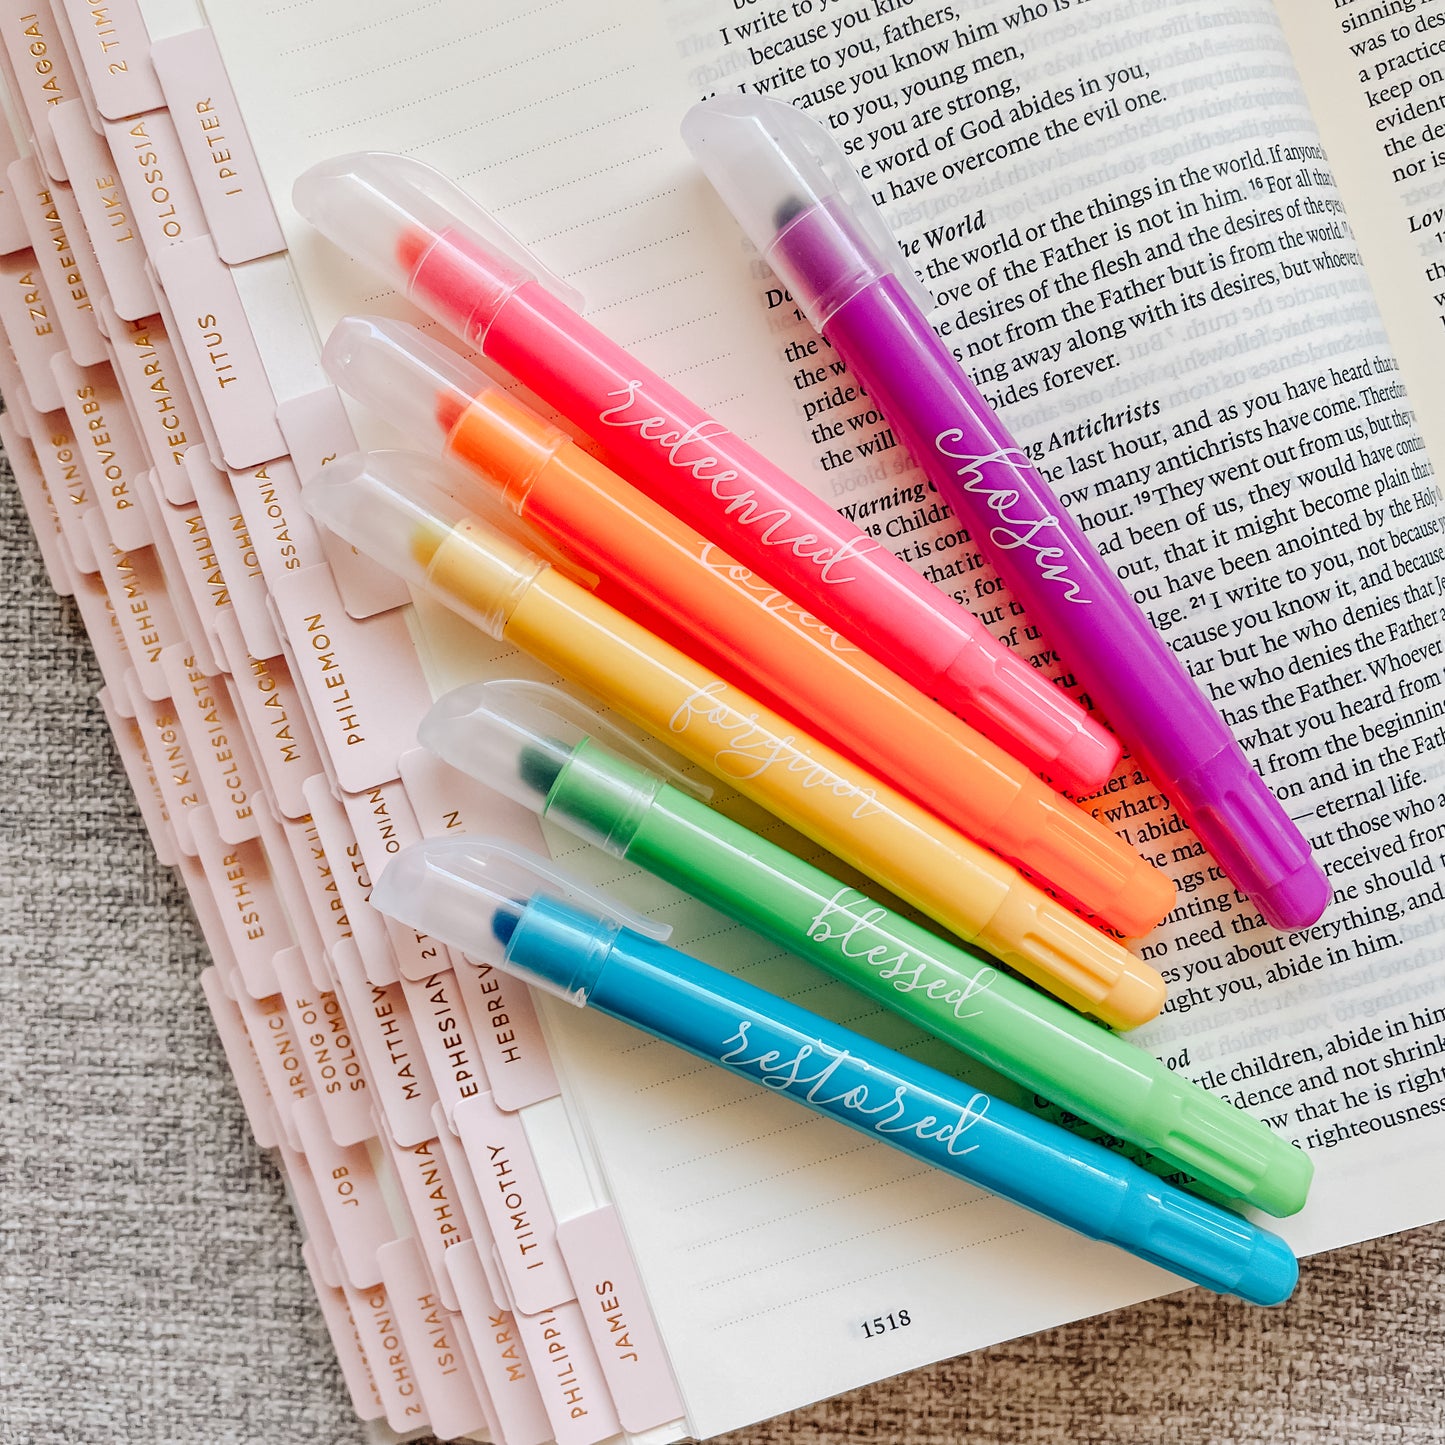 The Best Bible Highlighters for 2023- Art New York